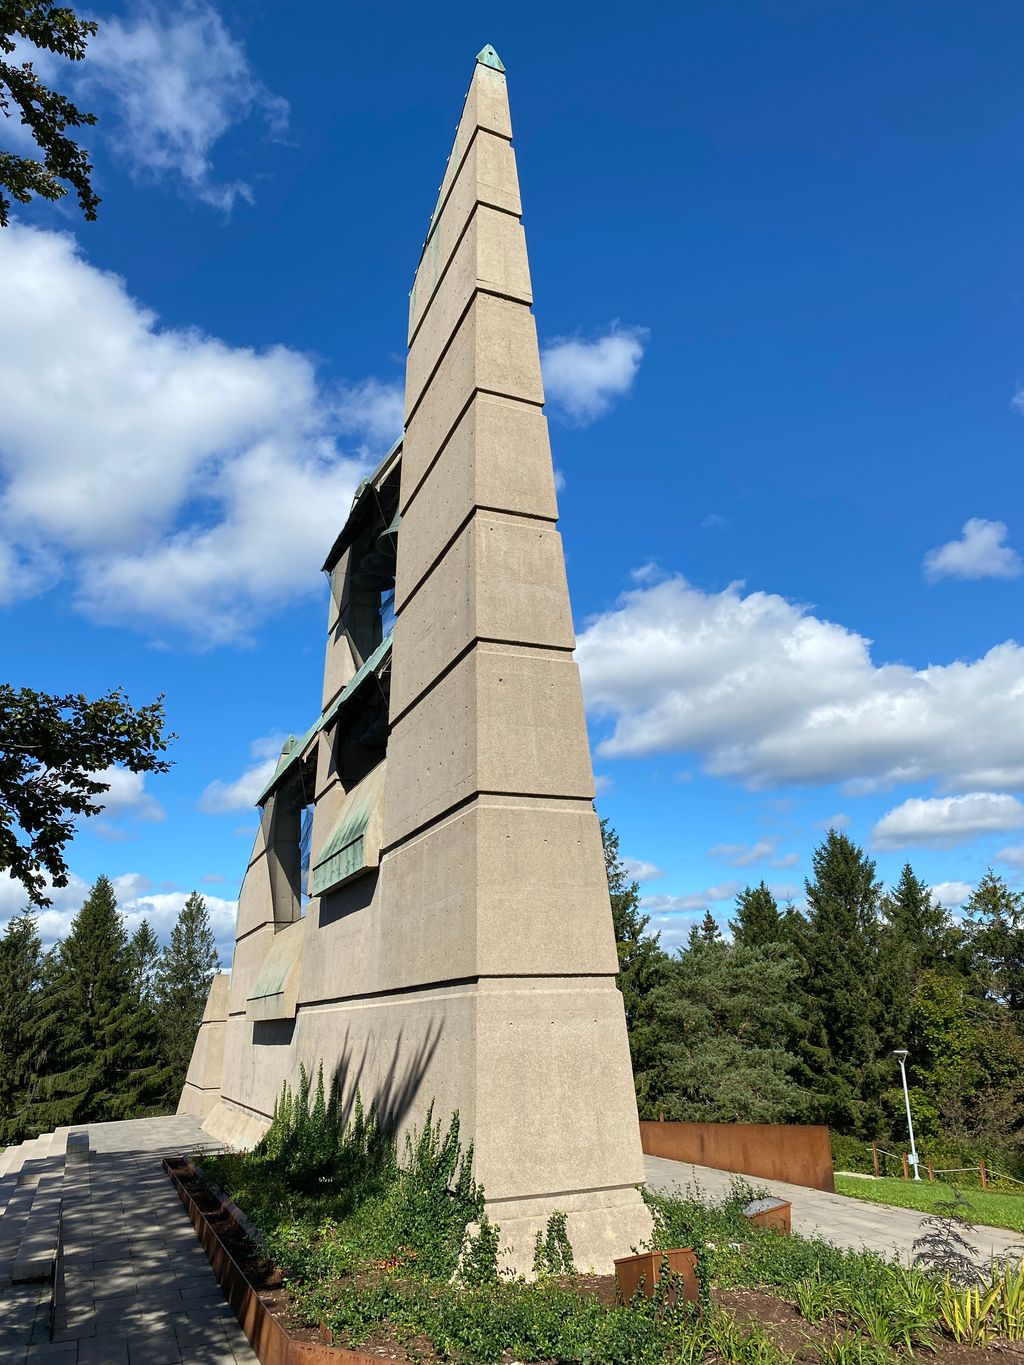 Halifax-Explosion-Memorial-Bell-Tower